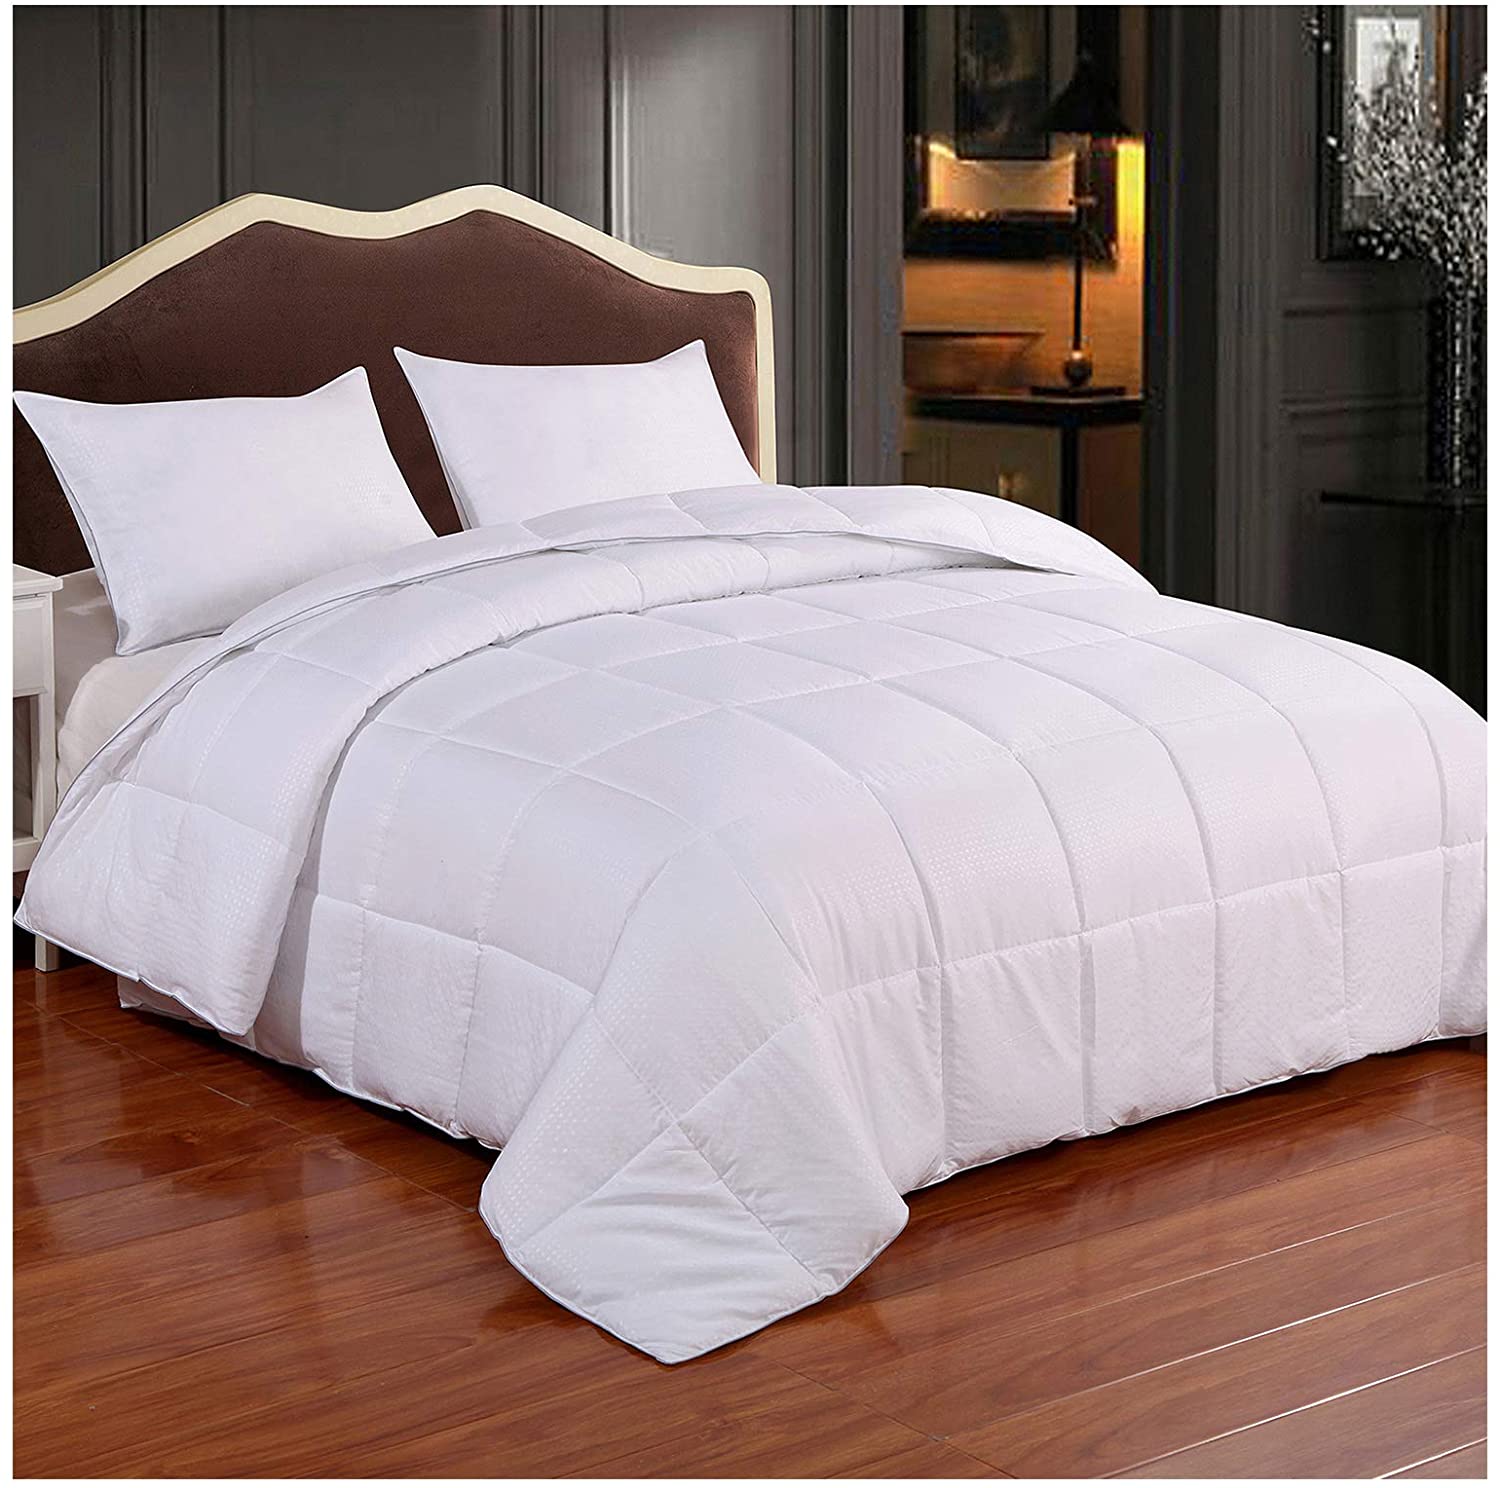 Price:$47.99 Homelike Moment Queen Lightweight Comforter White - All Season Down Alternative Bed Comforter Summer Duvet Insert Quilted Comforters Full / Queen Size White Square Embossed : Home & Kitchen